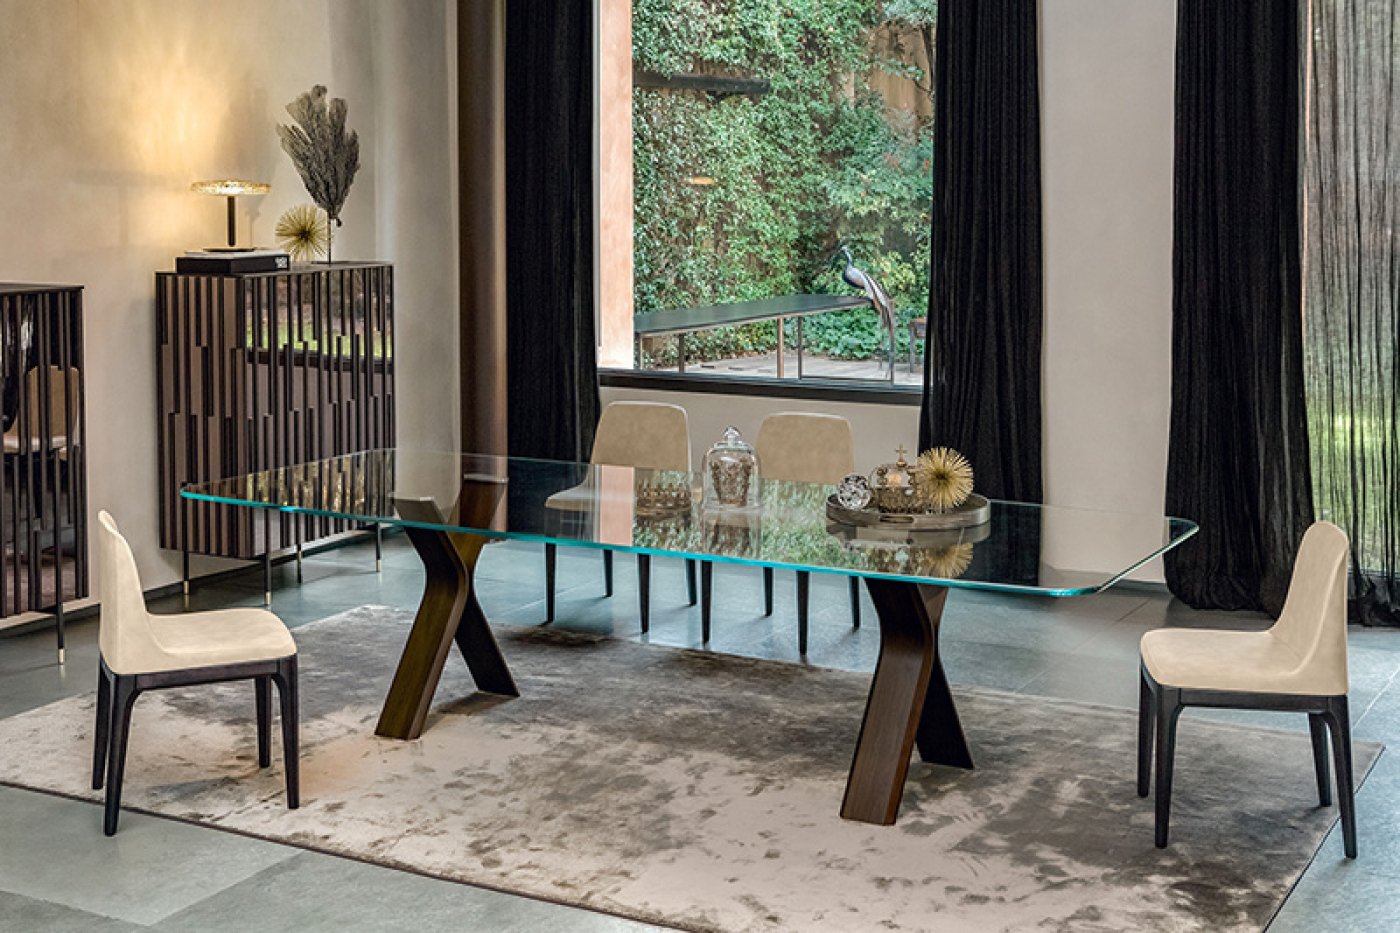 Still Extendible Table dining from Tonin Casa, designed by Angelo Tomaiuolo